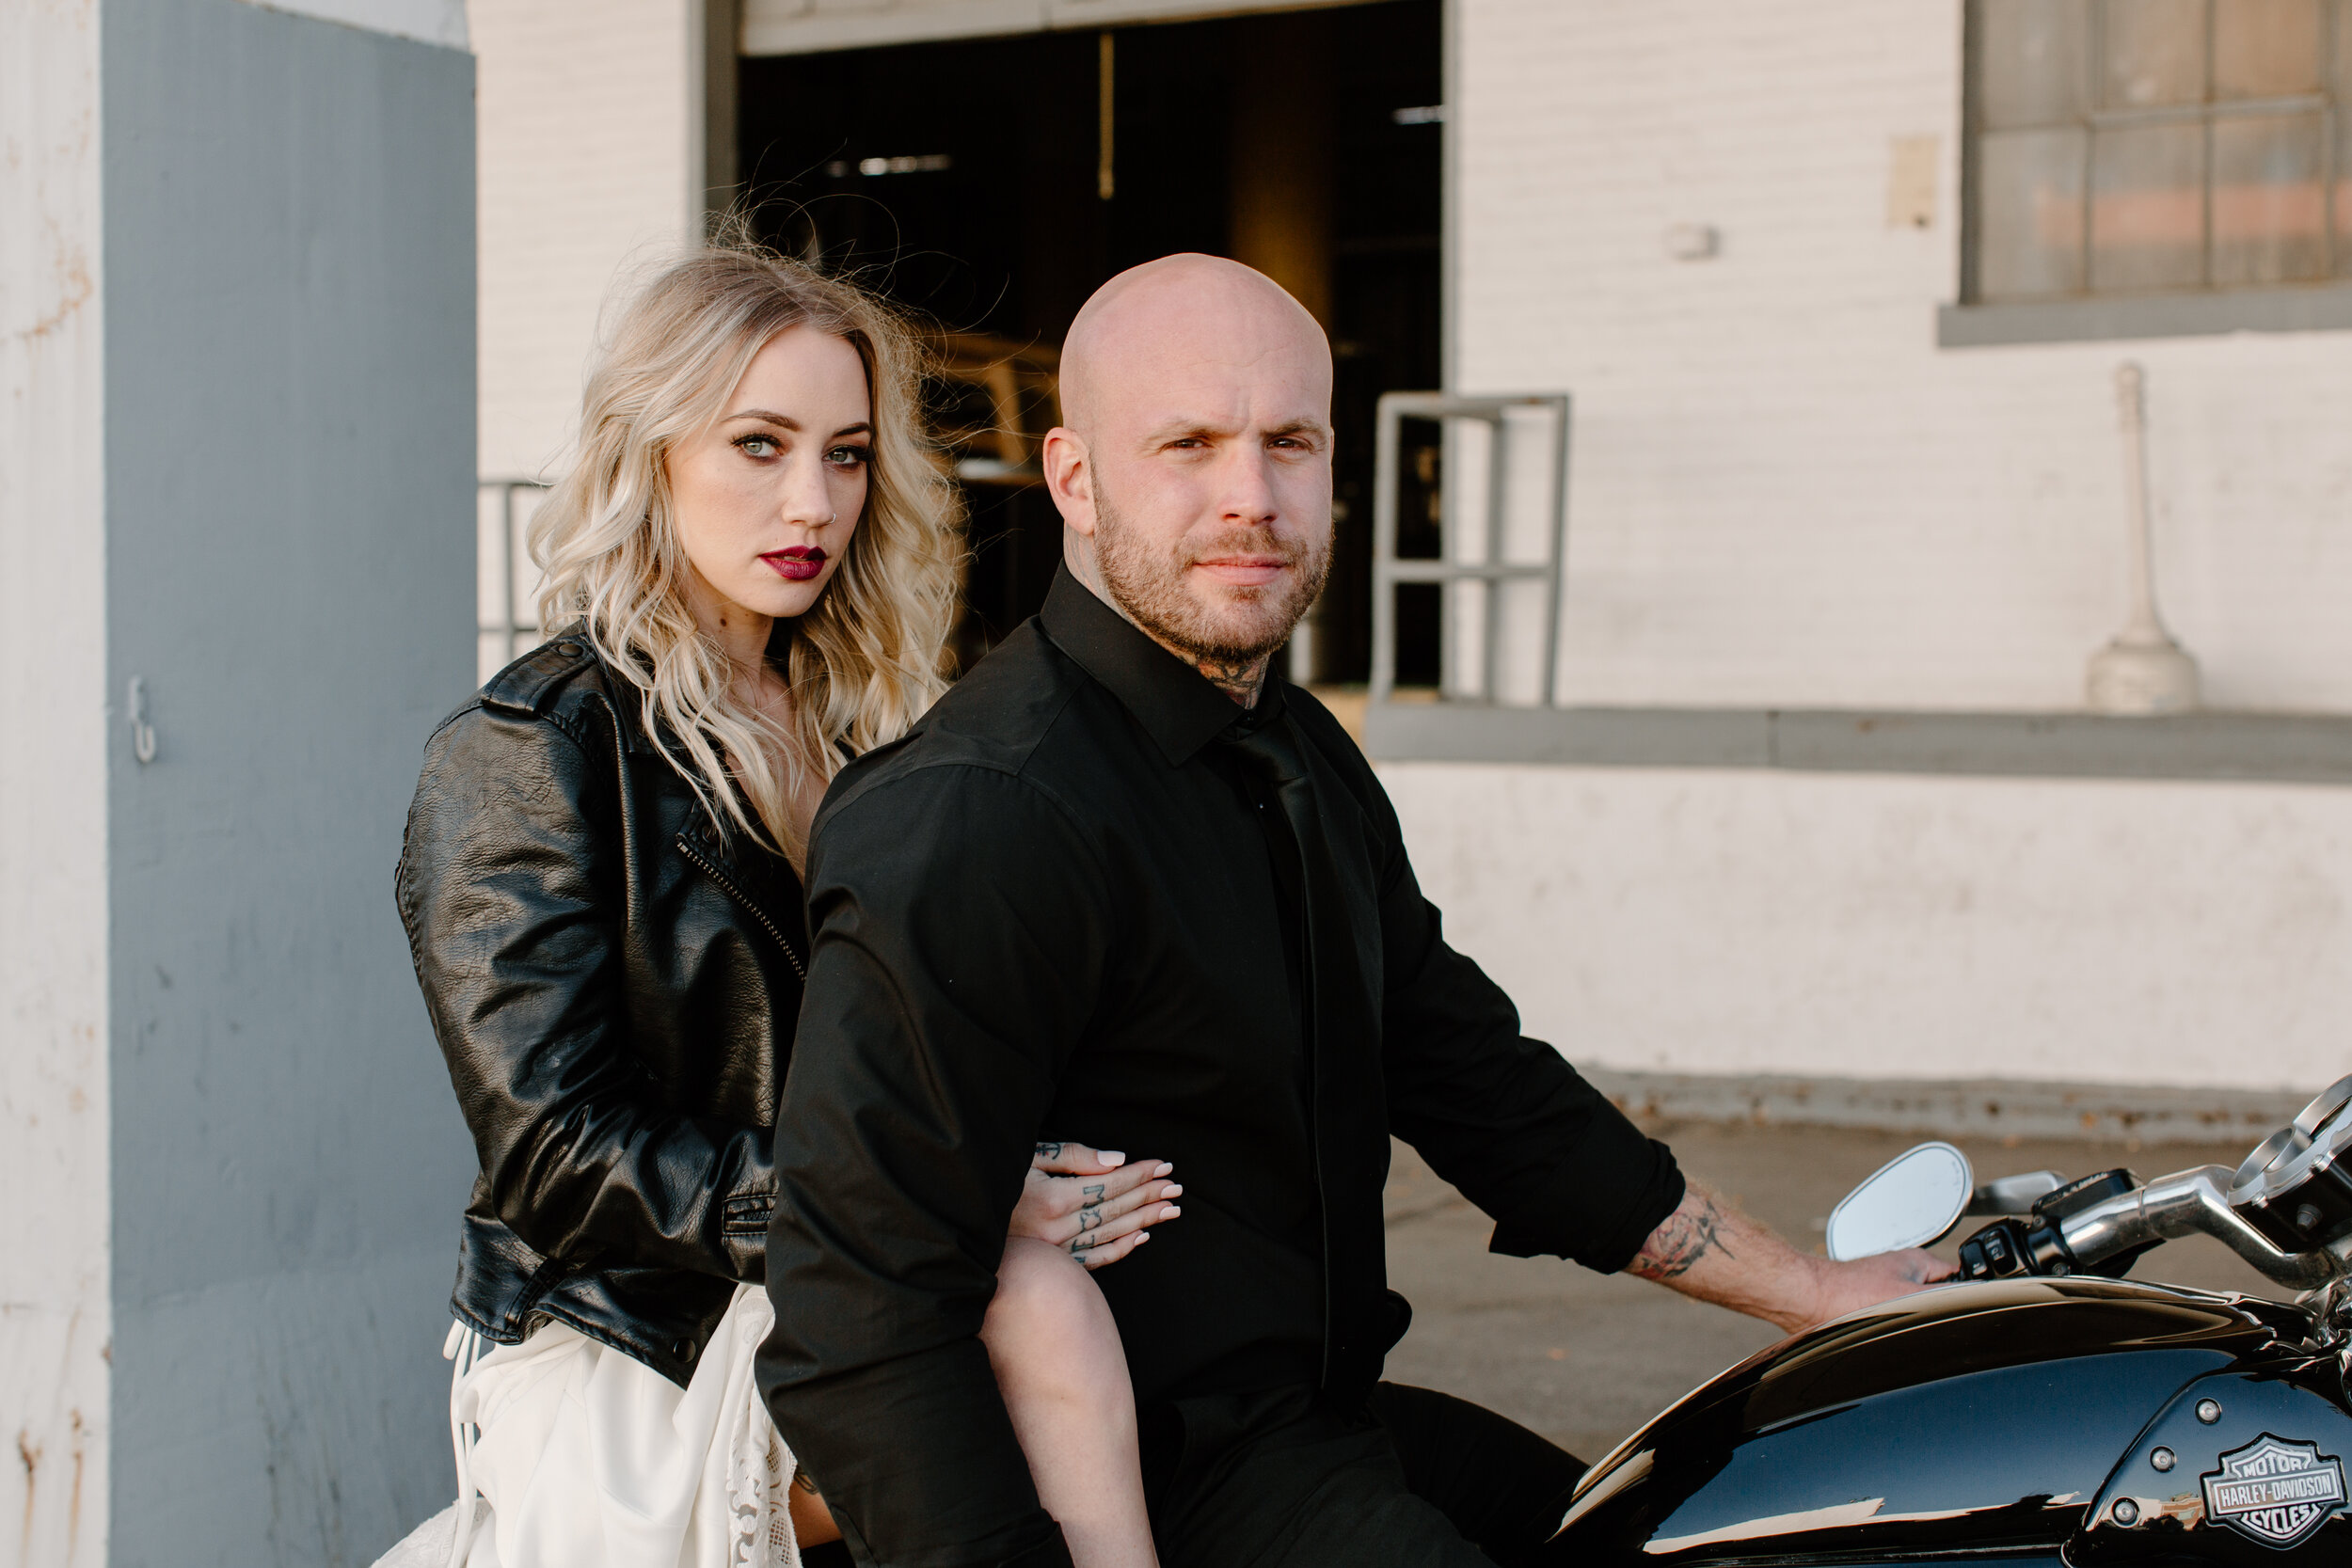 An edgy couple on their wedding day riding a motorcycle in Michigan. The bride has a smokey eye makeup and red lip which pairs well with her leather jacket.